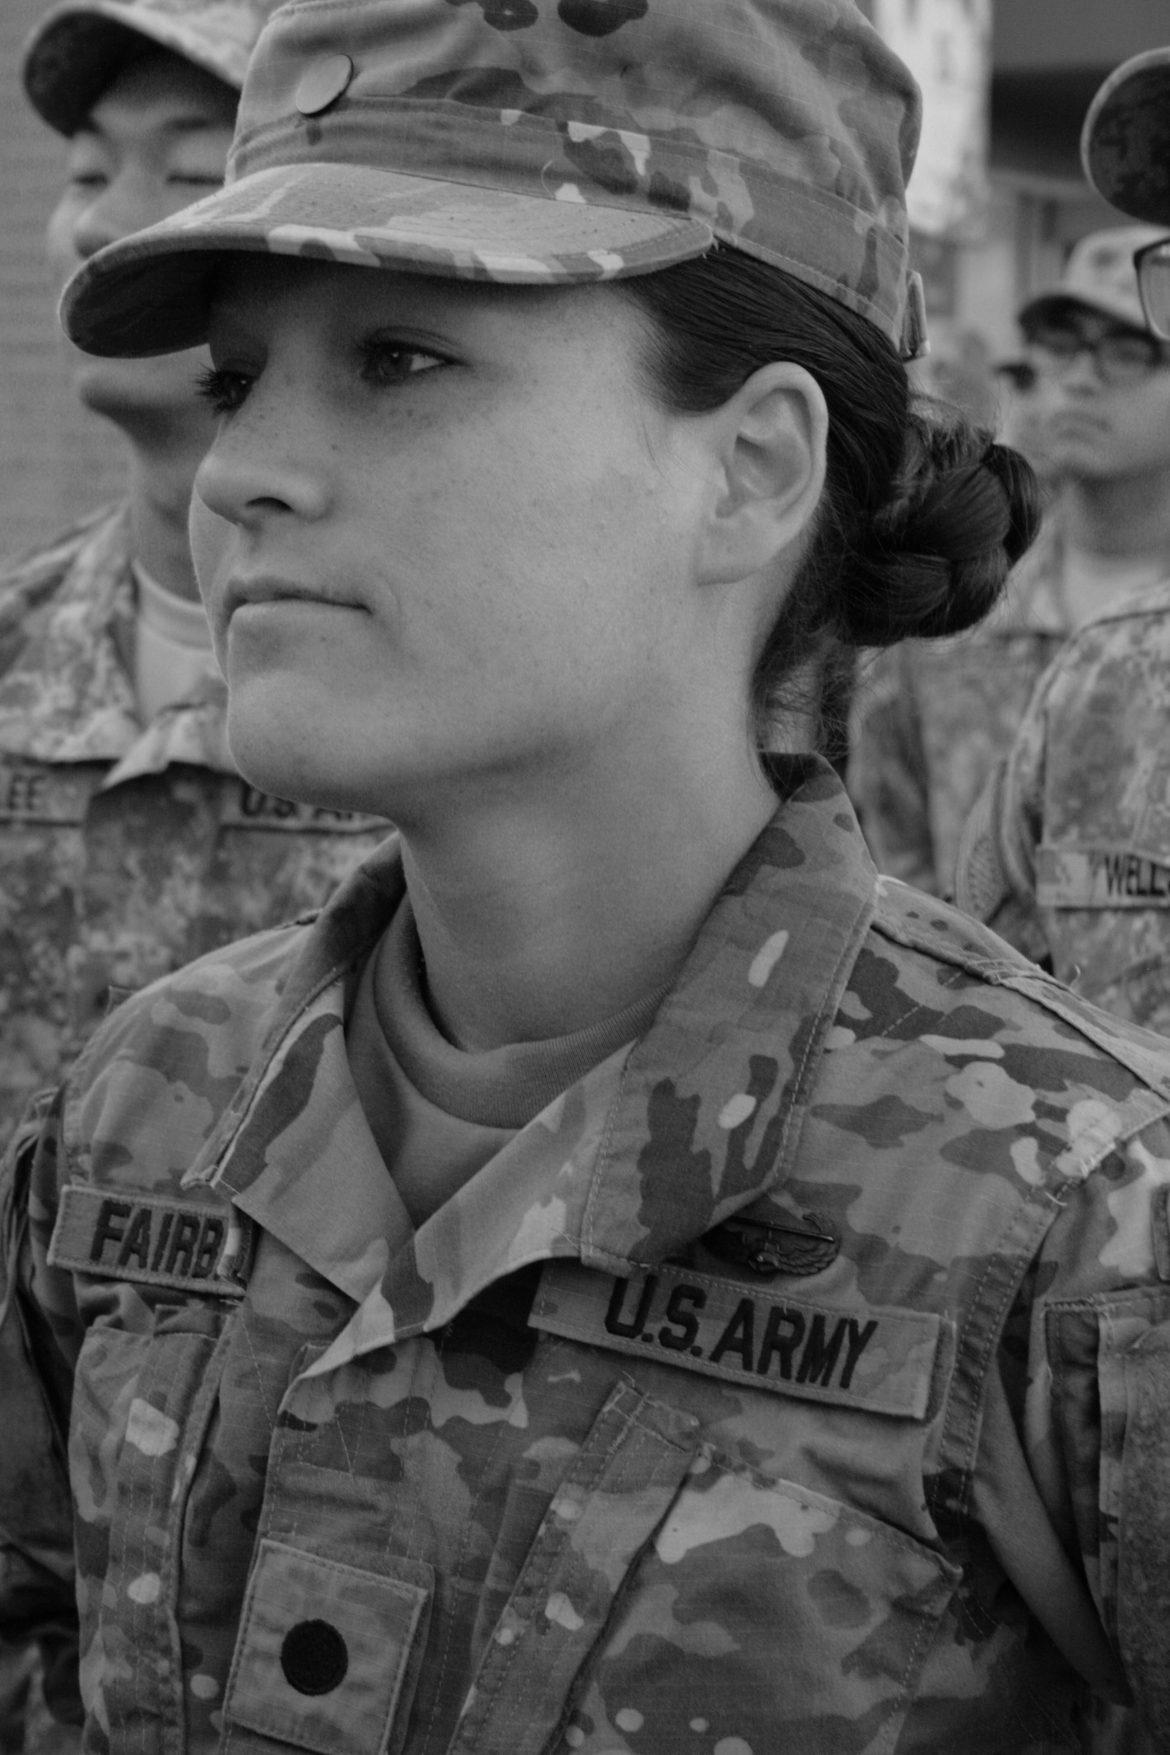 woman+dressed+in+army+uniform+looking+serious